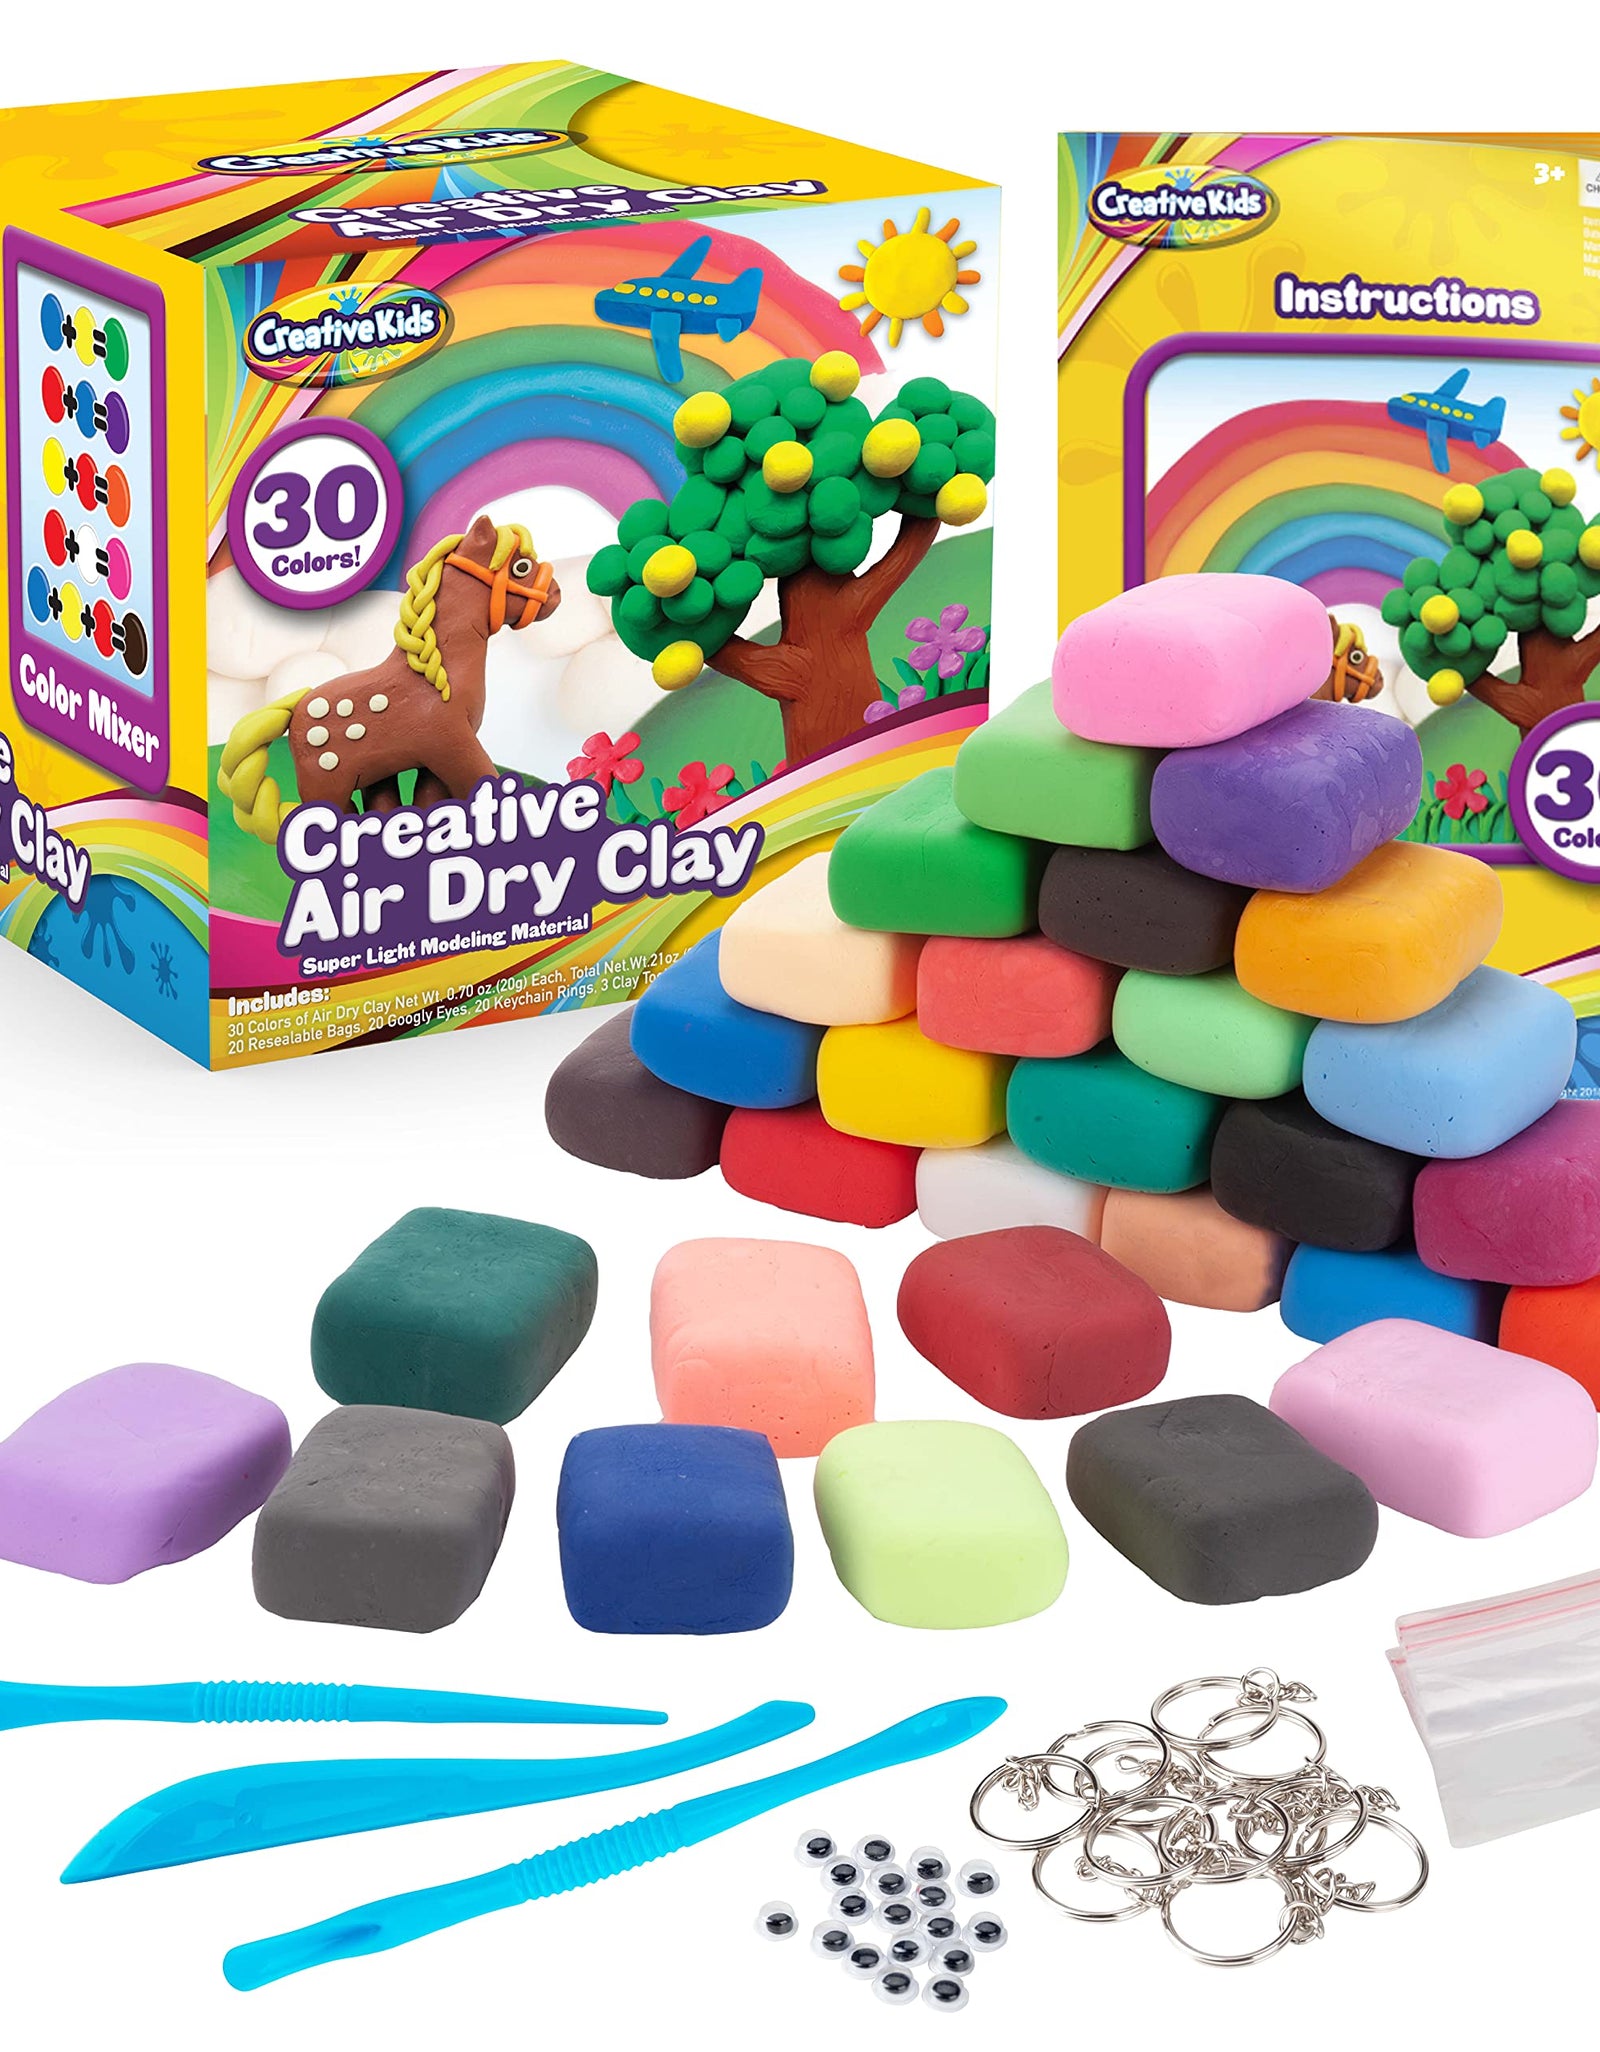 Creative Kids Air Dry Clay Modeling Crafts Kit For Children - Super Light Nontoxic - 30 Vibrant Colors & 3 Clay Tools - STEM Educational DIY Molding Set - Easy Instructions – Gift For Boys & Girls 4 +